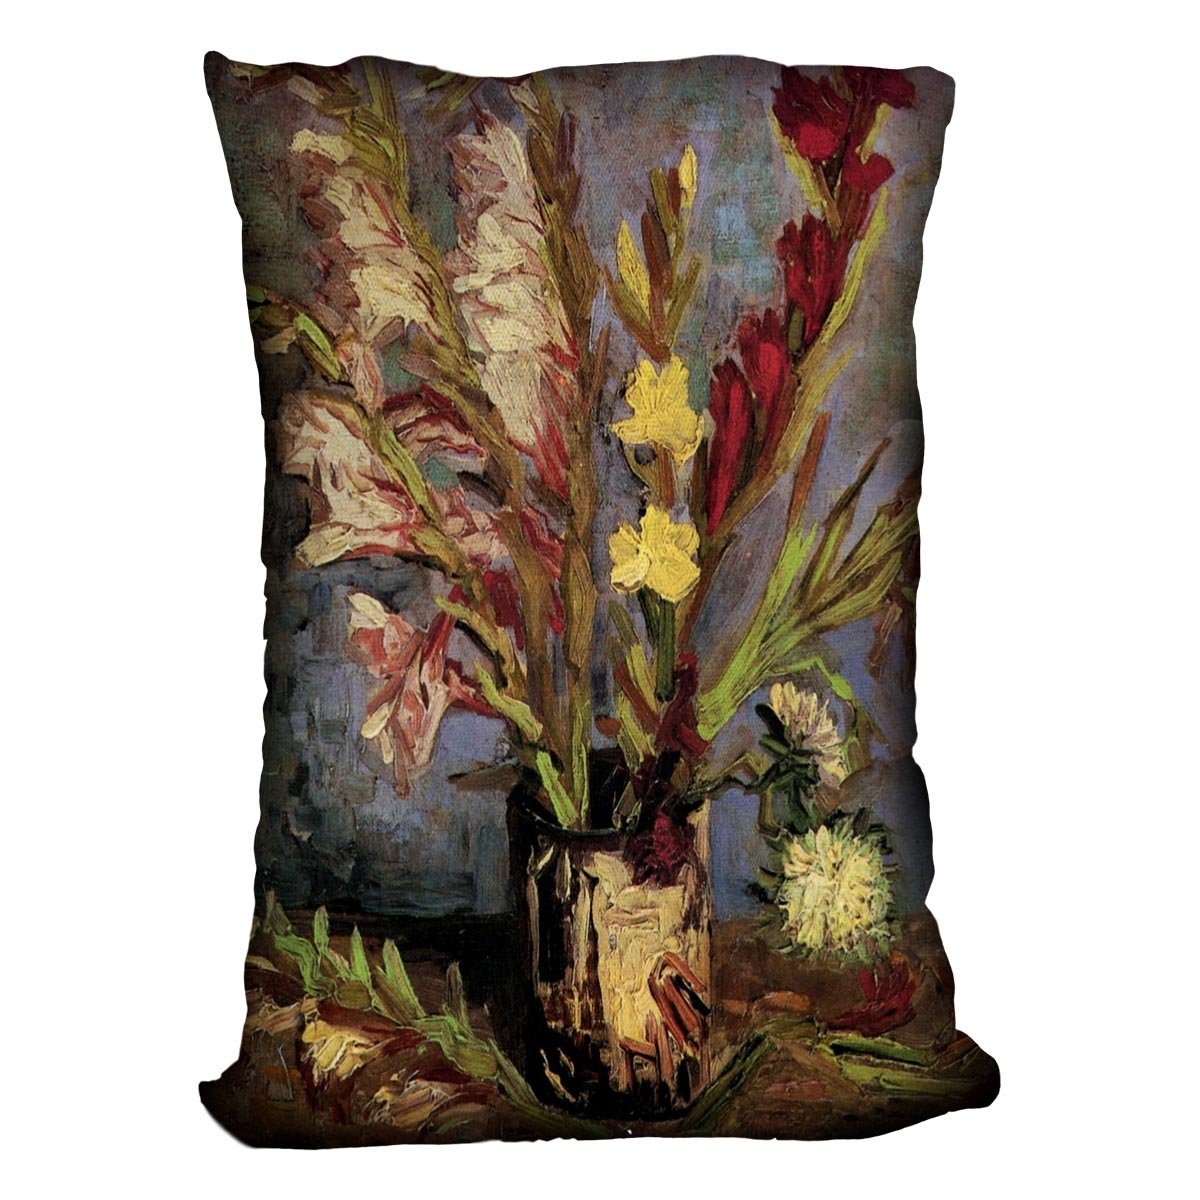 Vase with Gladioli 4 by Van Gogh Throw Pillow